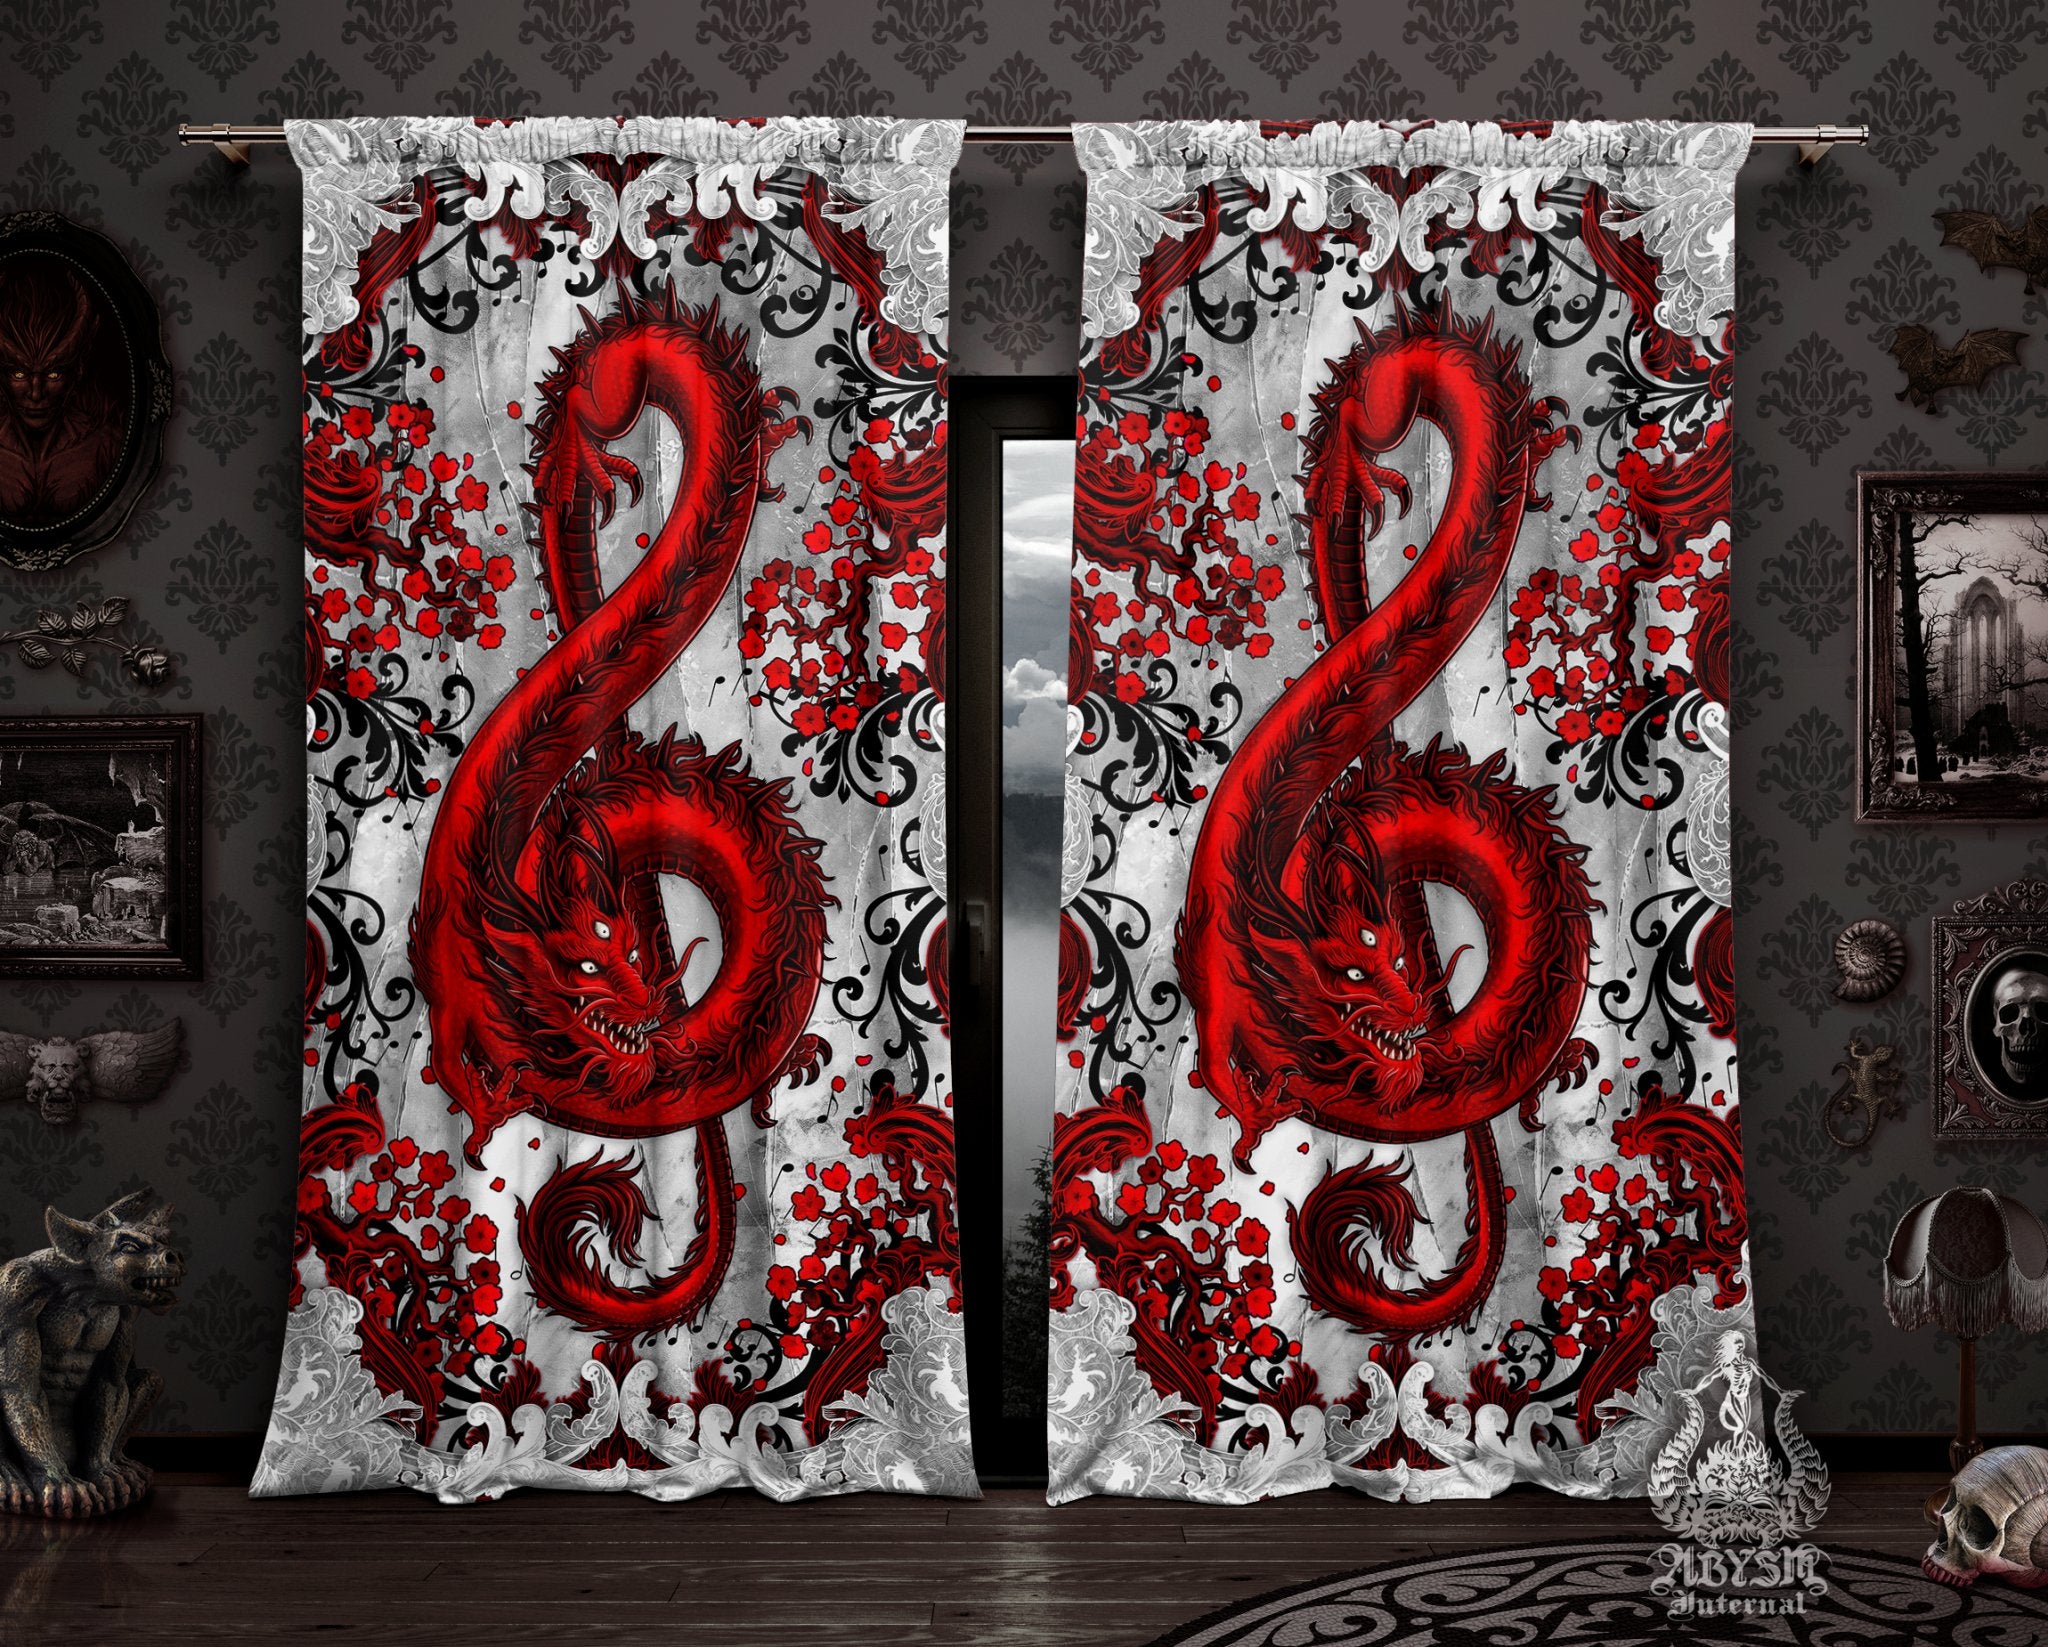 Red Dragon Curtains, 50x84' Printed Window Panels, Treble Clef, Music Art Print, Gothic Home Decor - Bloody White Goth - Abysm Internal